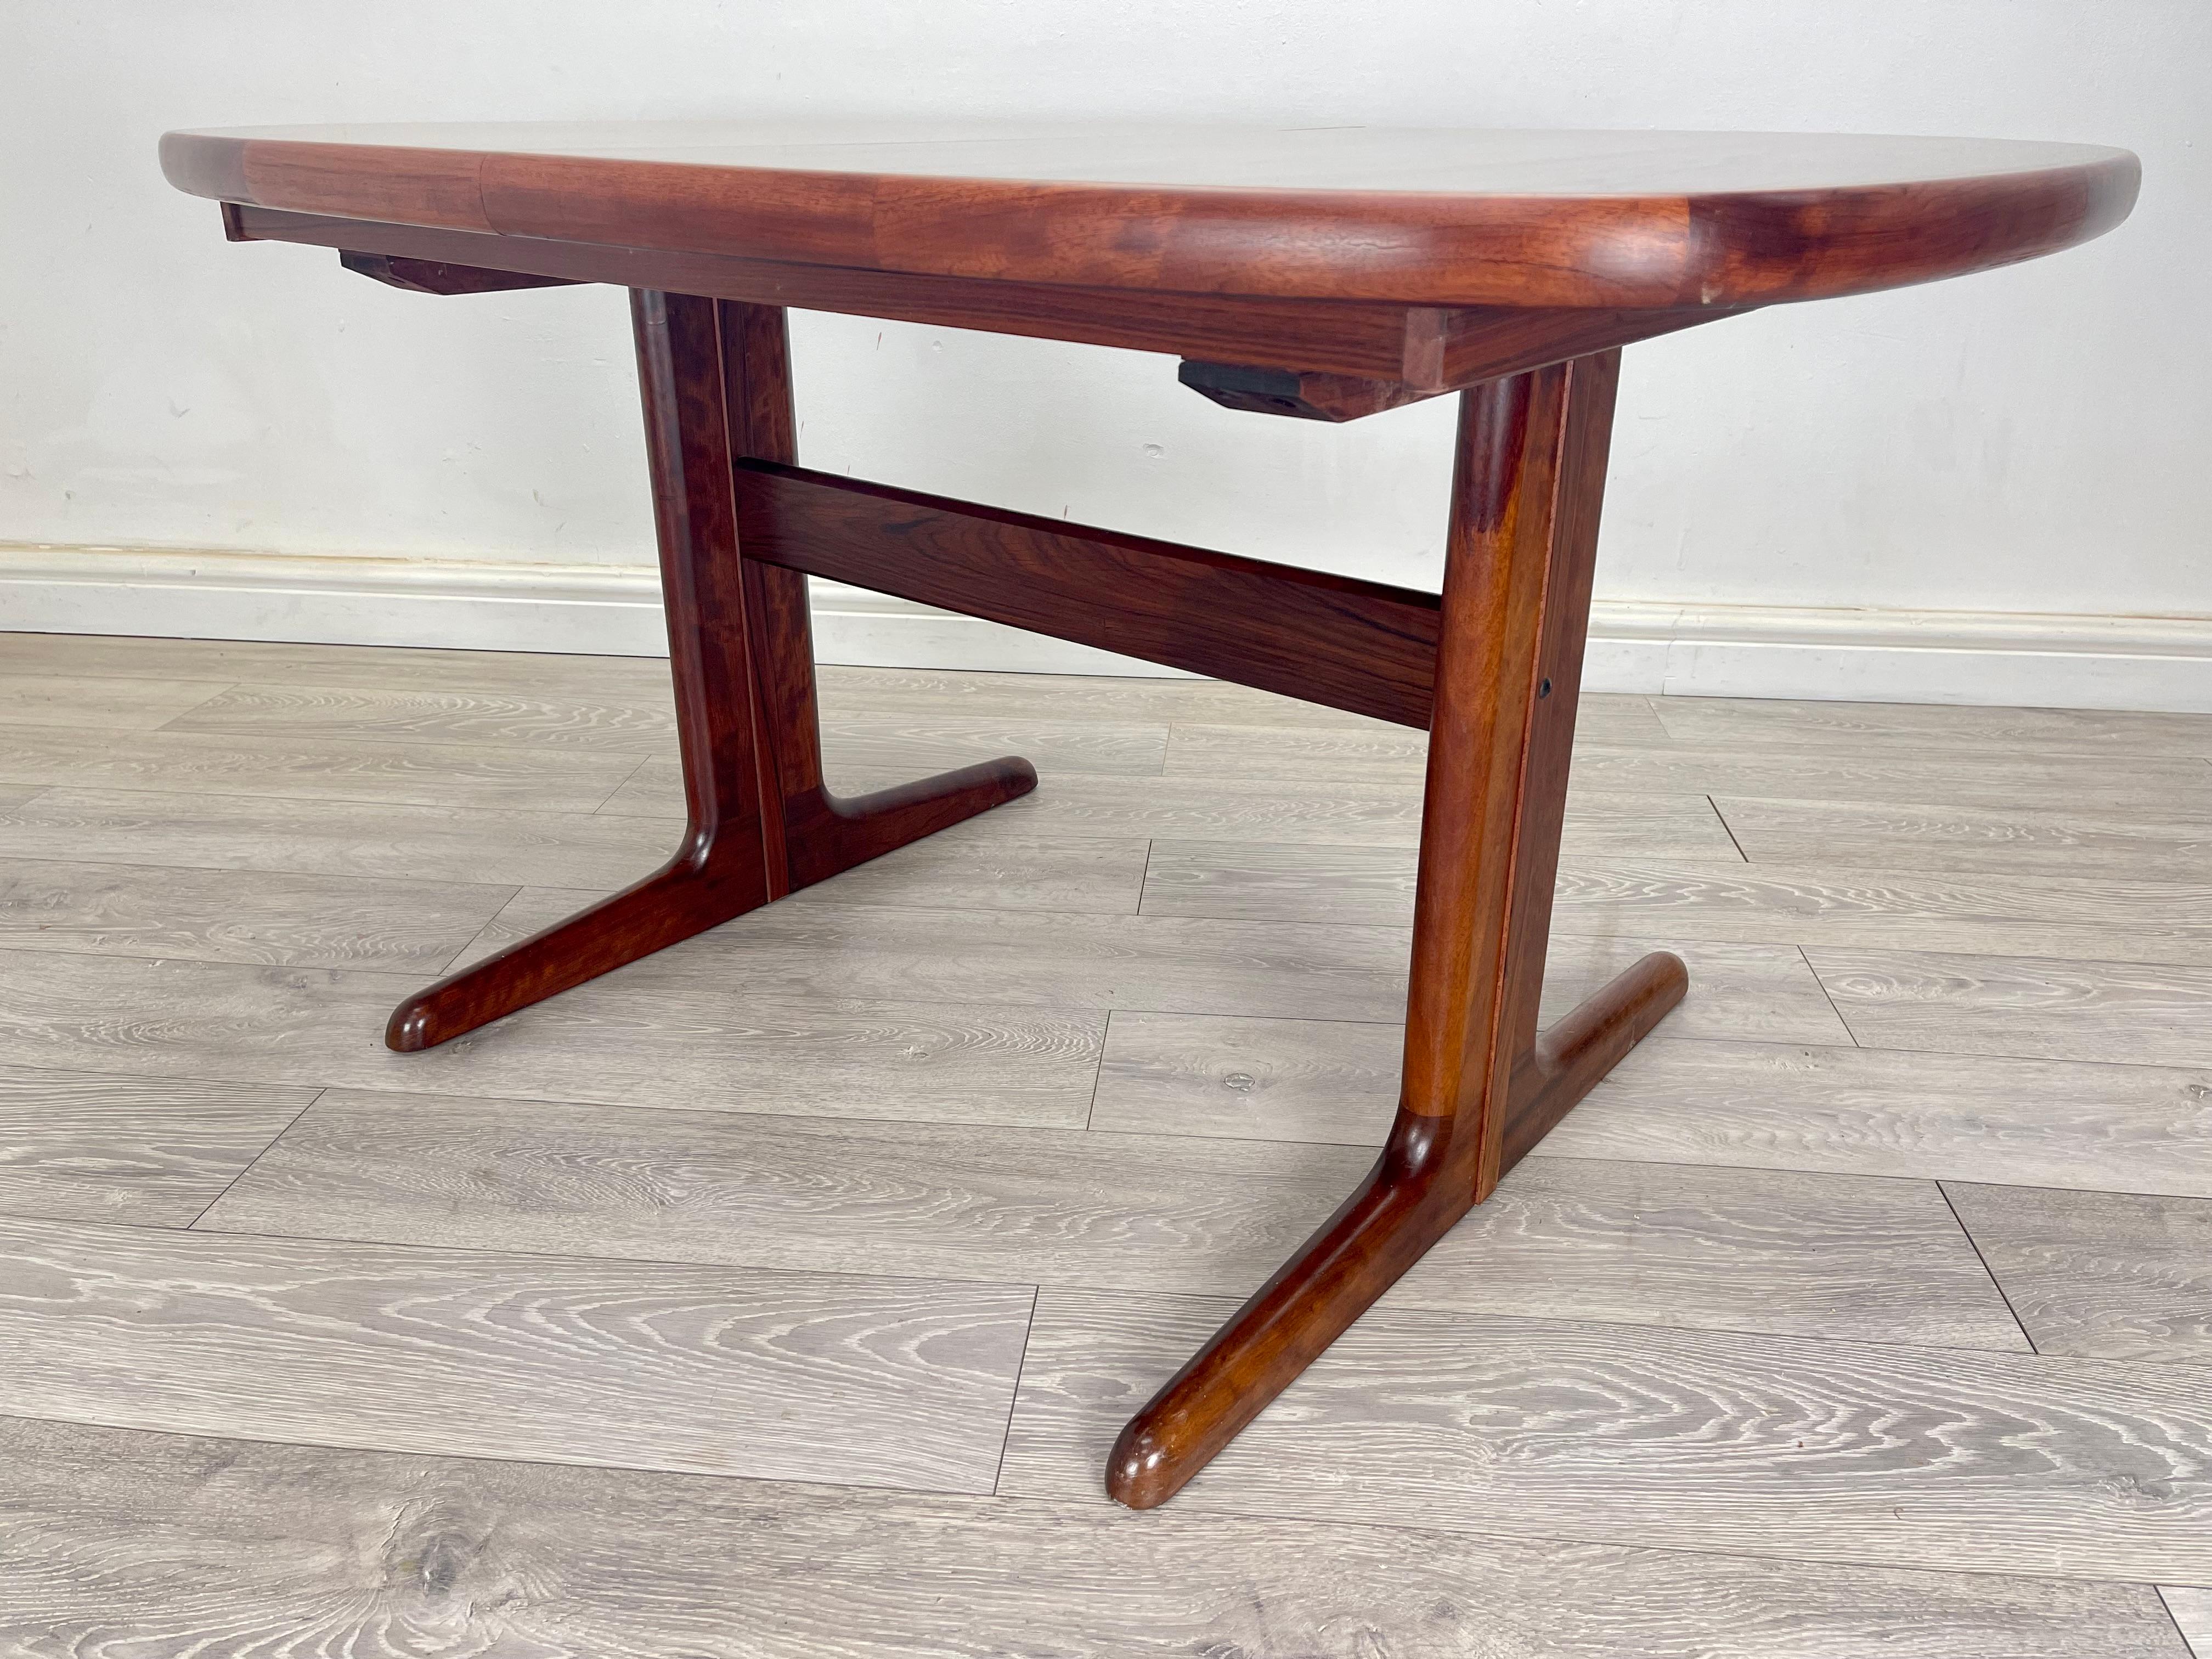 DINING TABLE 
Midcentury Danish rosewood oval extendable dining table made by Skovby, circa 1960. The table has stunning rosewood grain throughout, there’s two extension leaf which neatly store underneath the table. 

DIMENSION 
Height- 72 cm